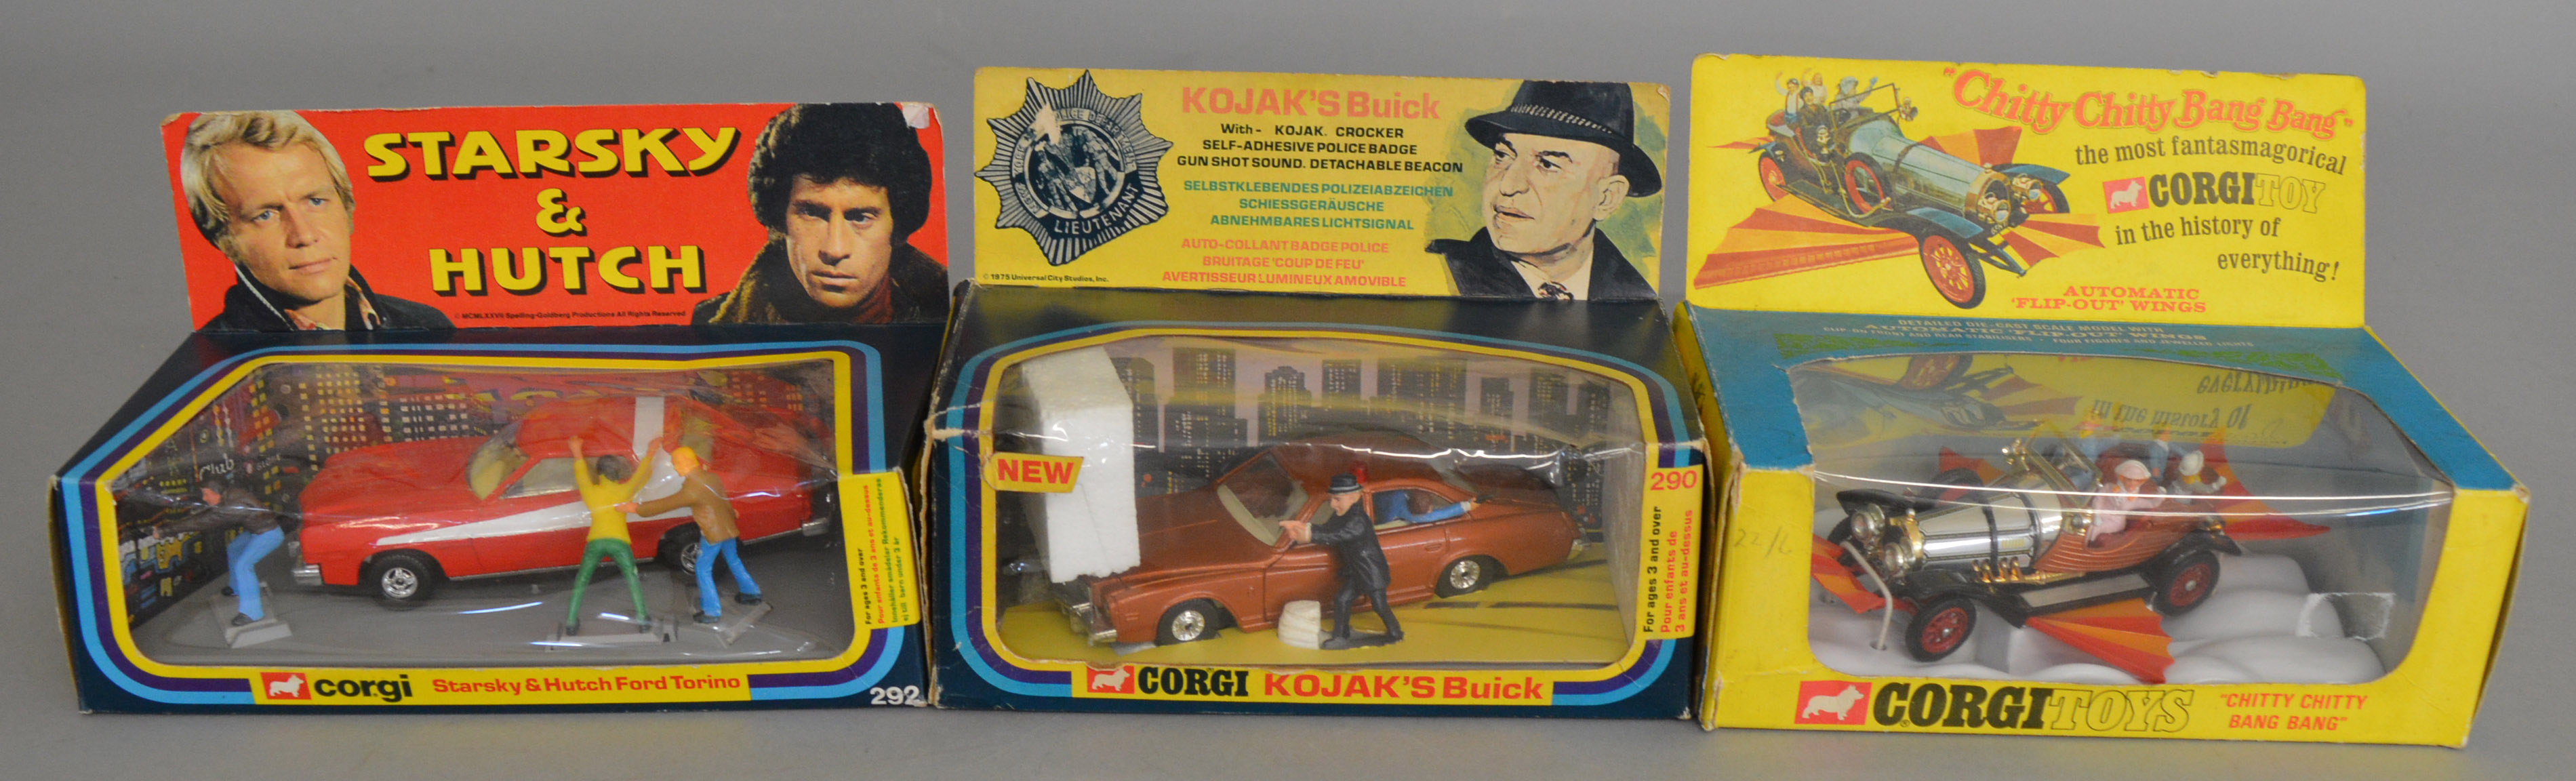 3 Corgi Toys Film and TV related diecast models, 290 Kojak's Buick (missing Police badge), 292